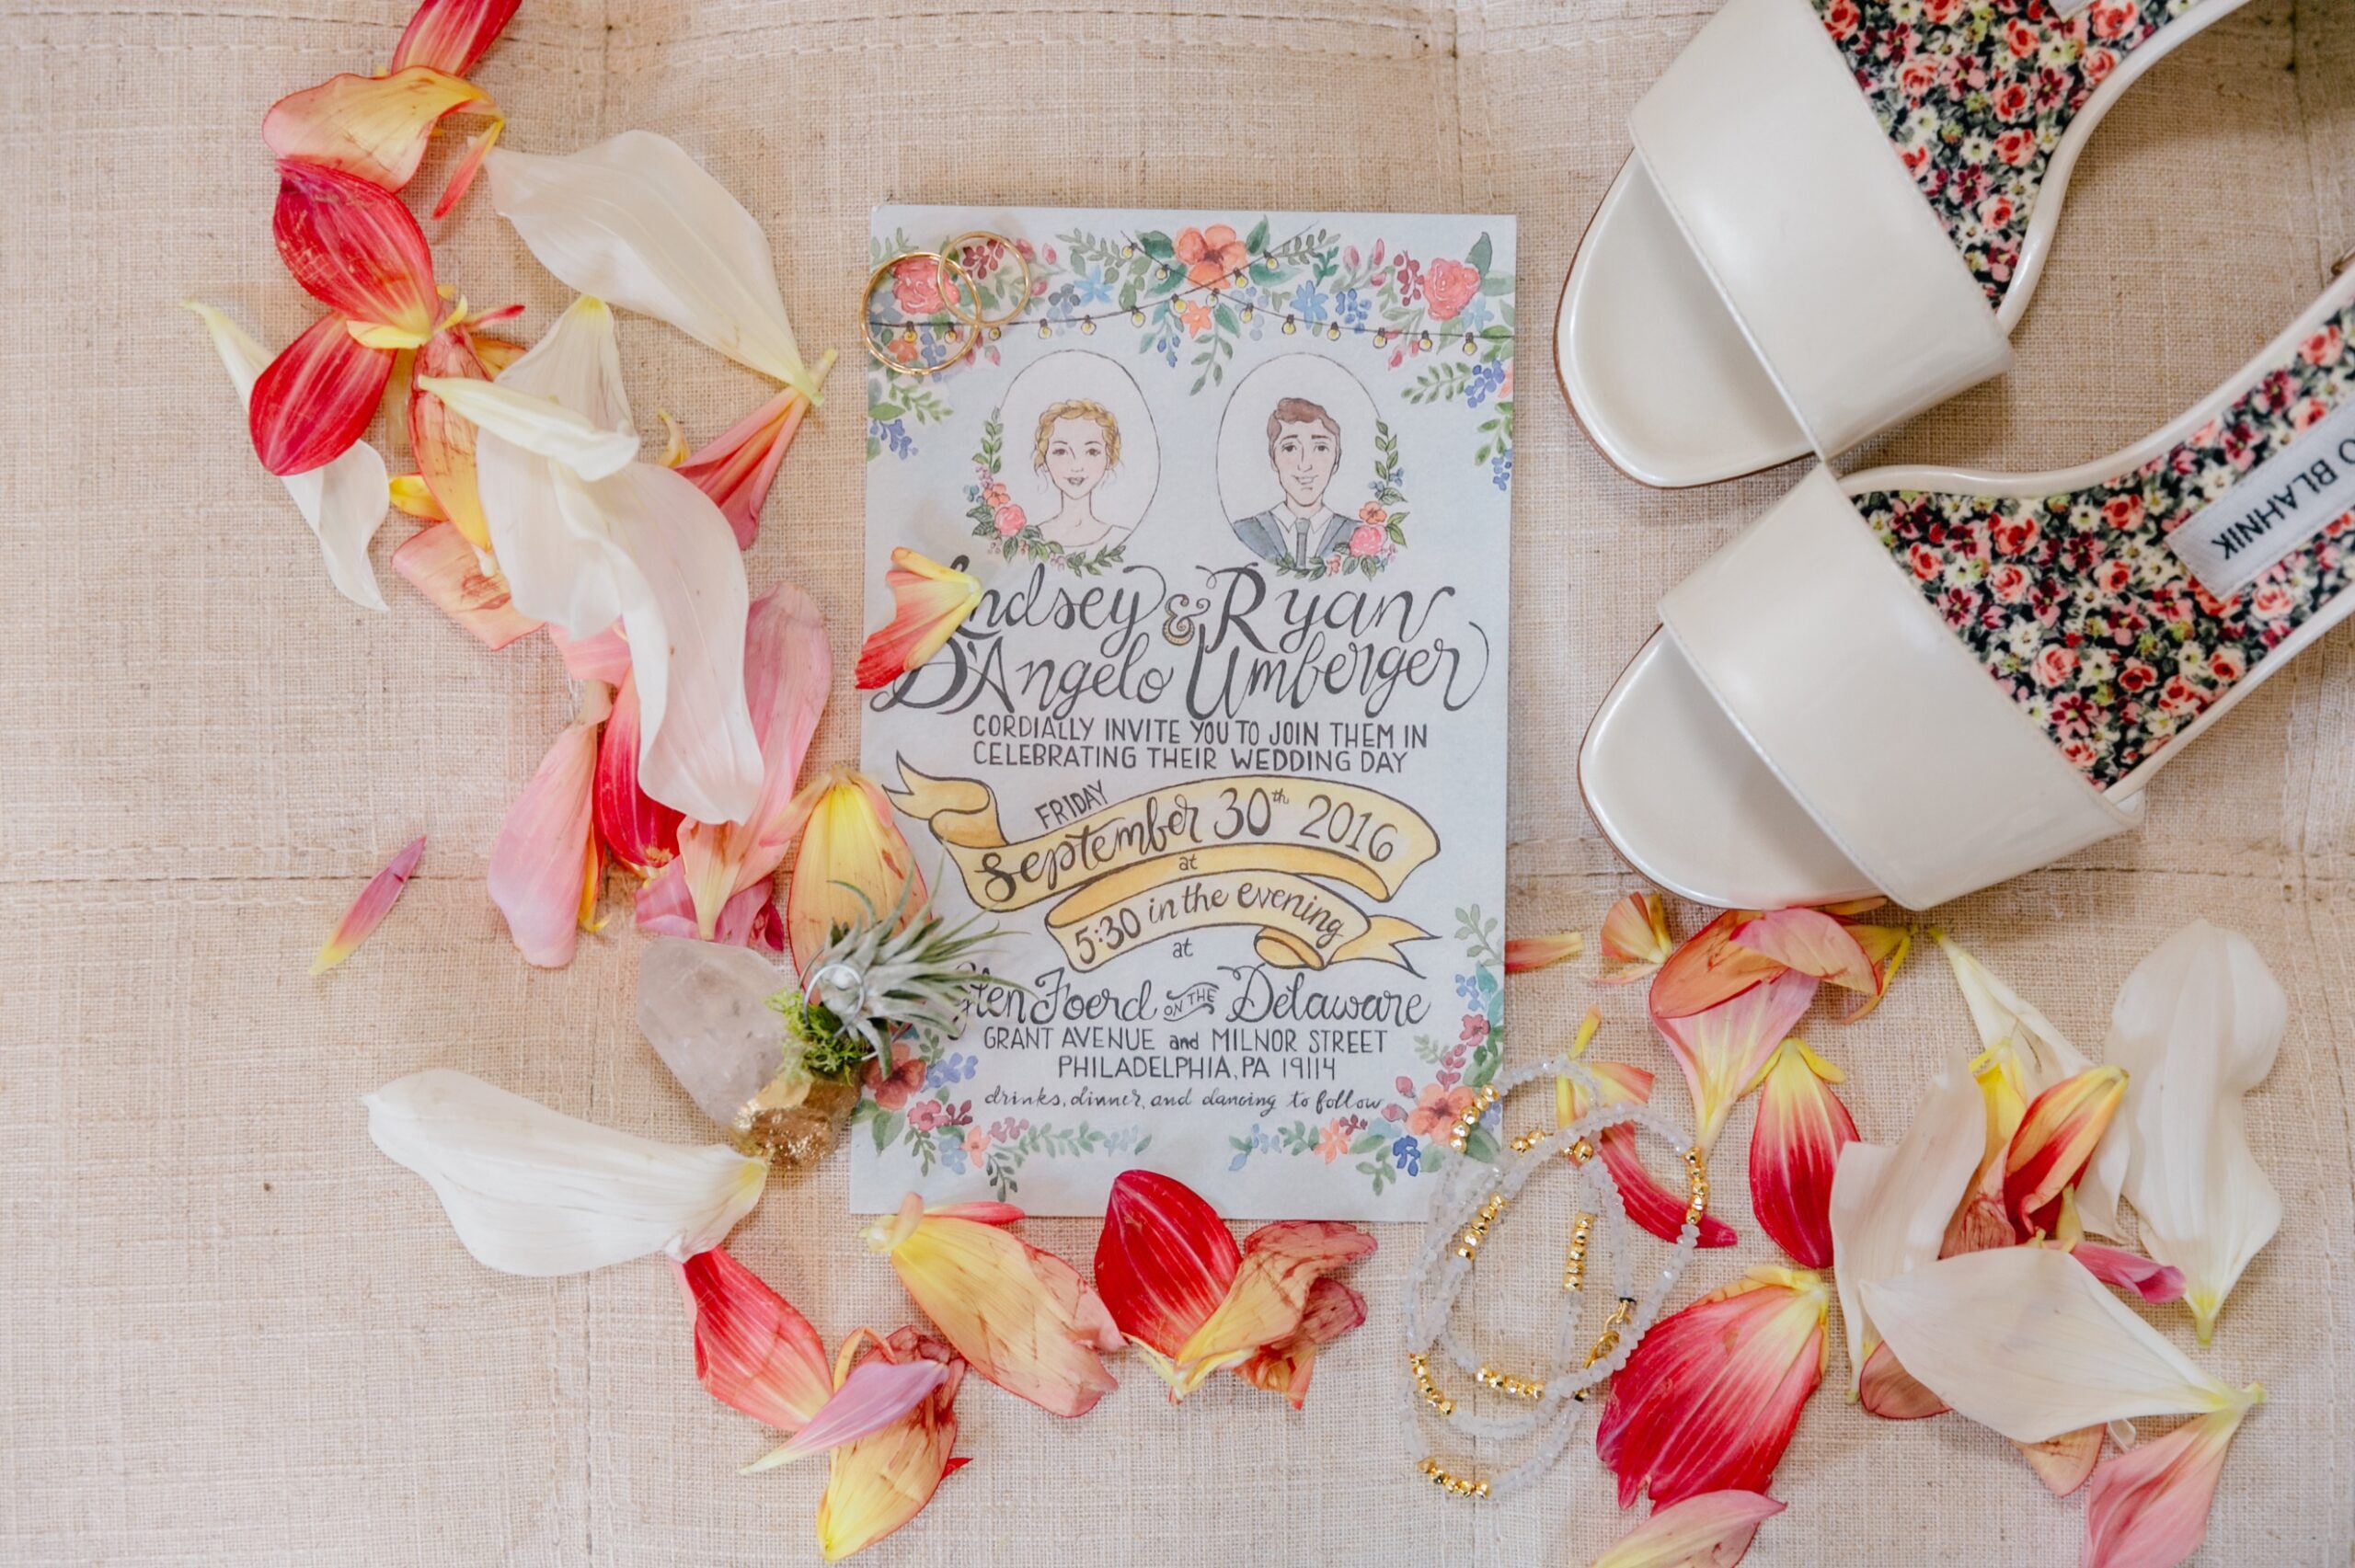 Eclectic invitation suite for an estate wedding